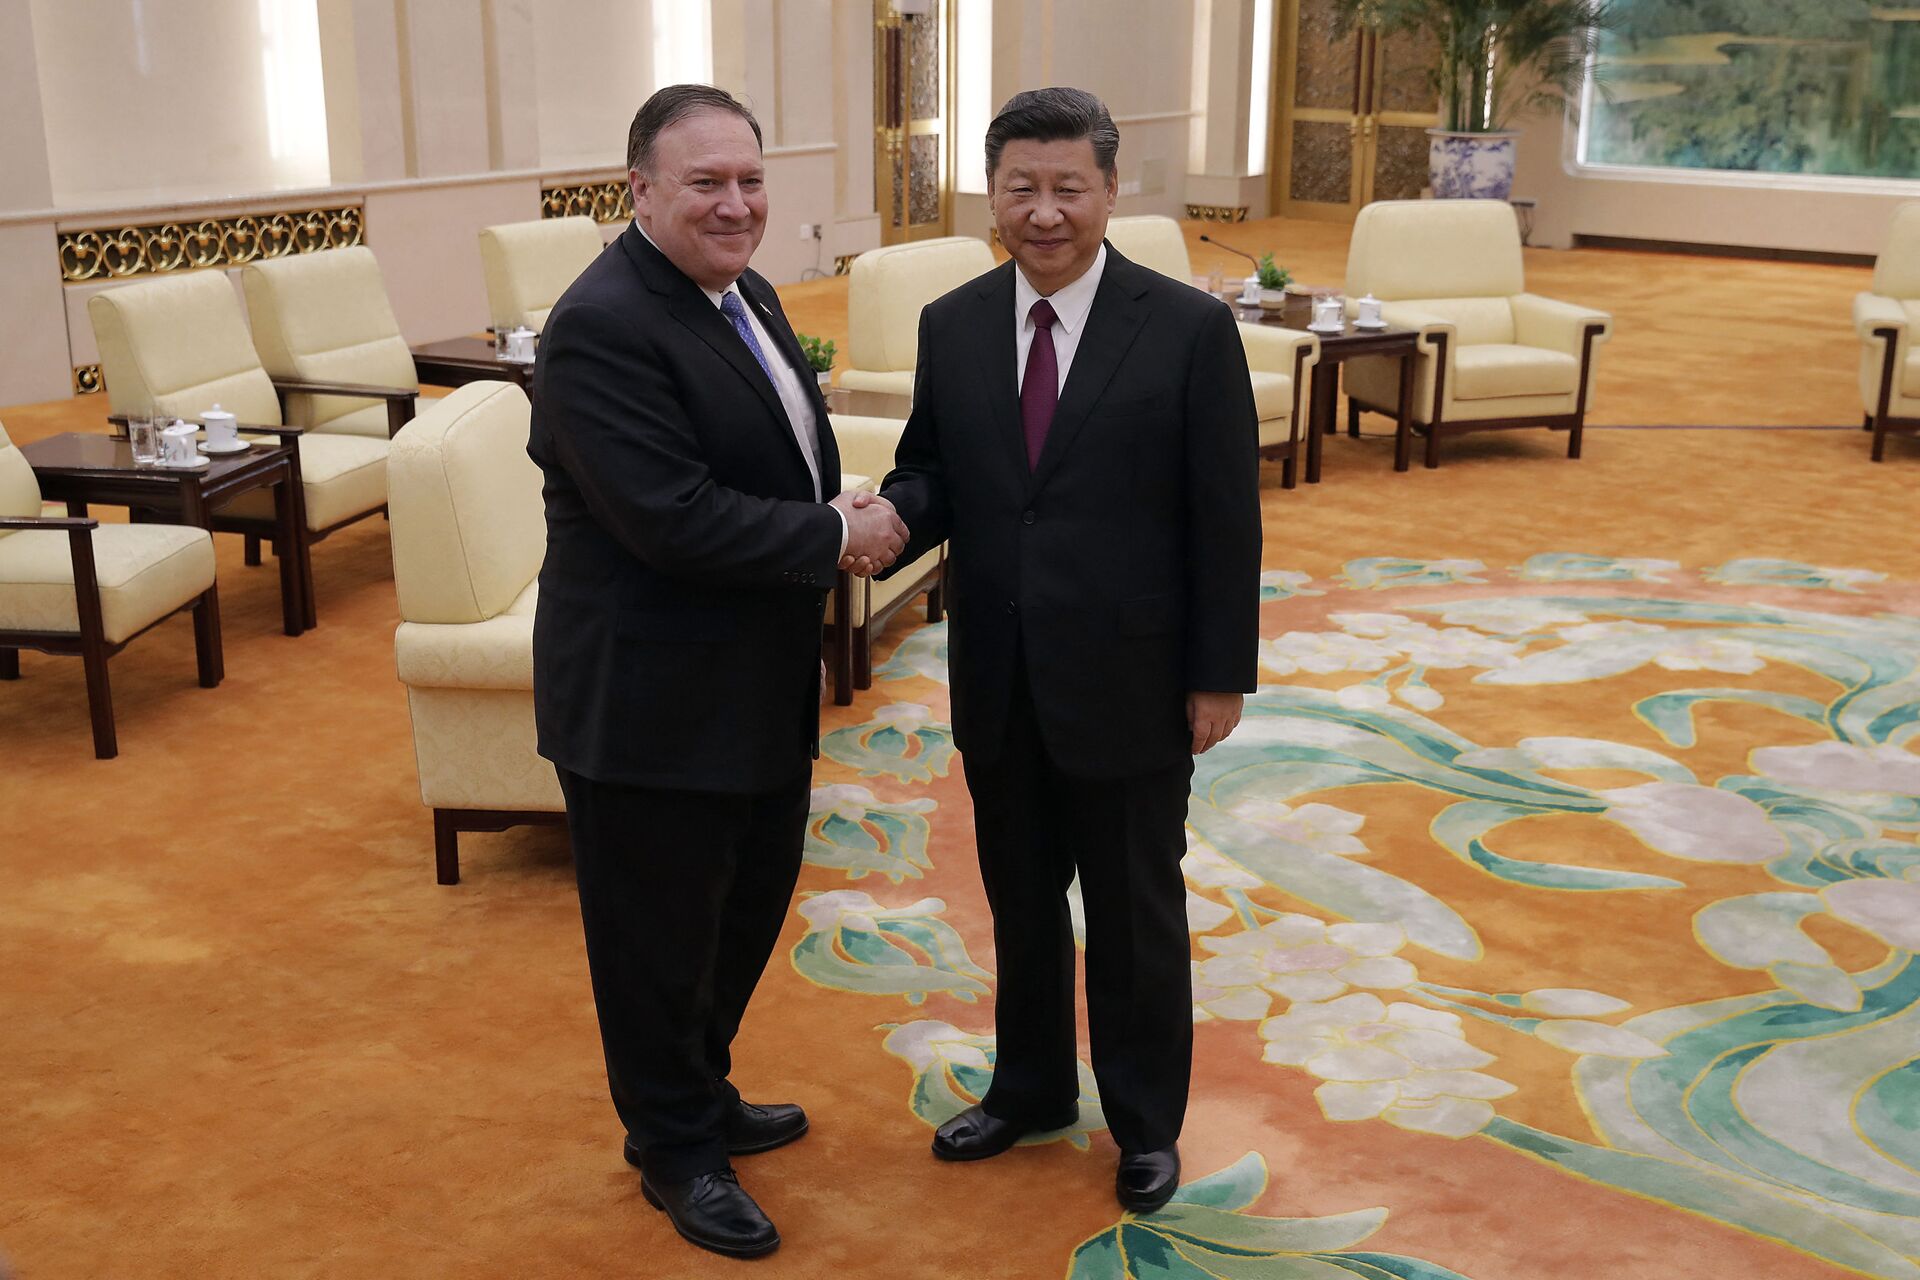 US Secretary of State Mike Pompeo (L) shakes hands with Chinese President Xi Jinping as they pose for photograph at the Great Hall of the People in Beijing on June 14, 2018 - Sputnik International, 1920, 07.09.2021